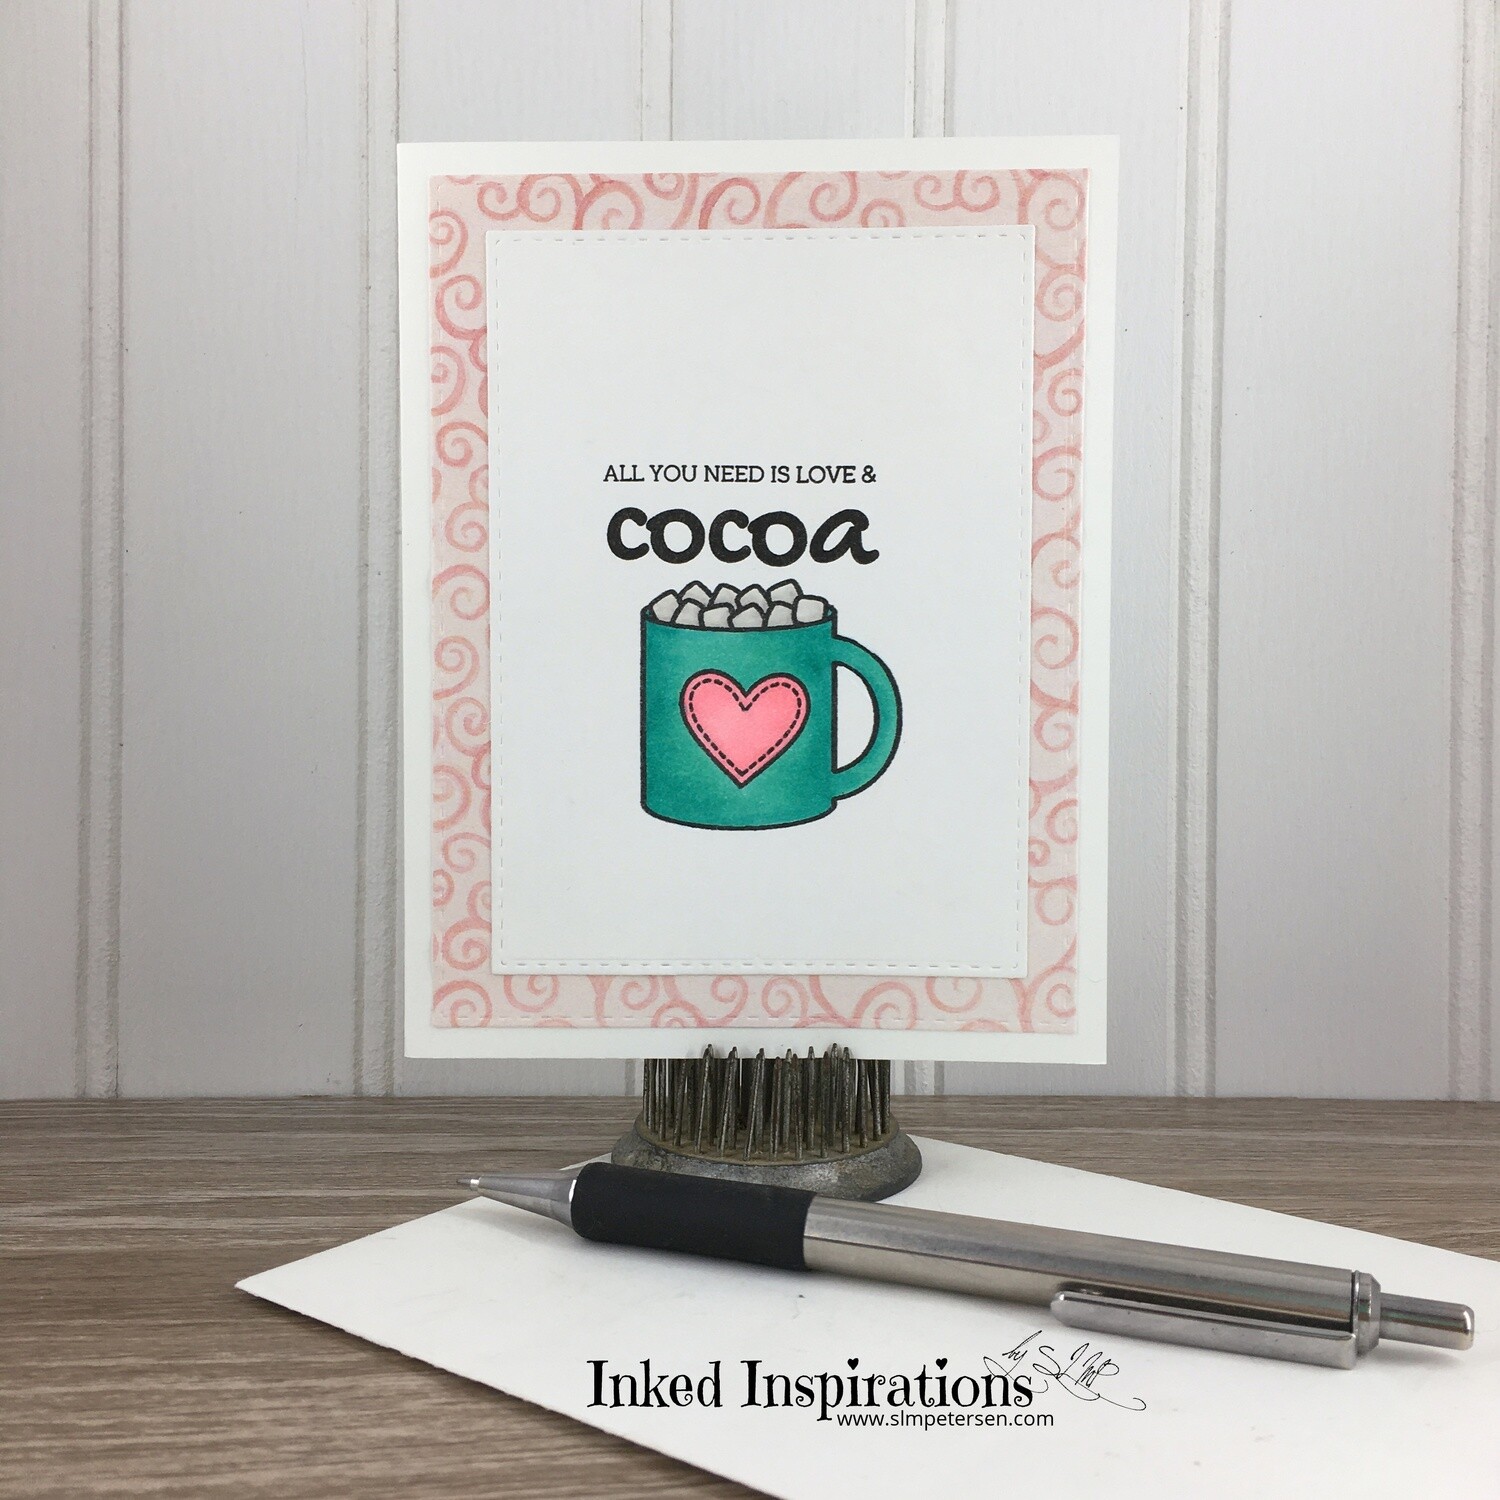 All You Need is Love & Cocoa - Teal Cup